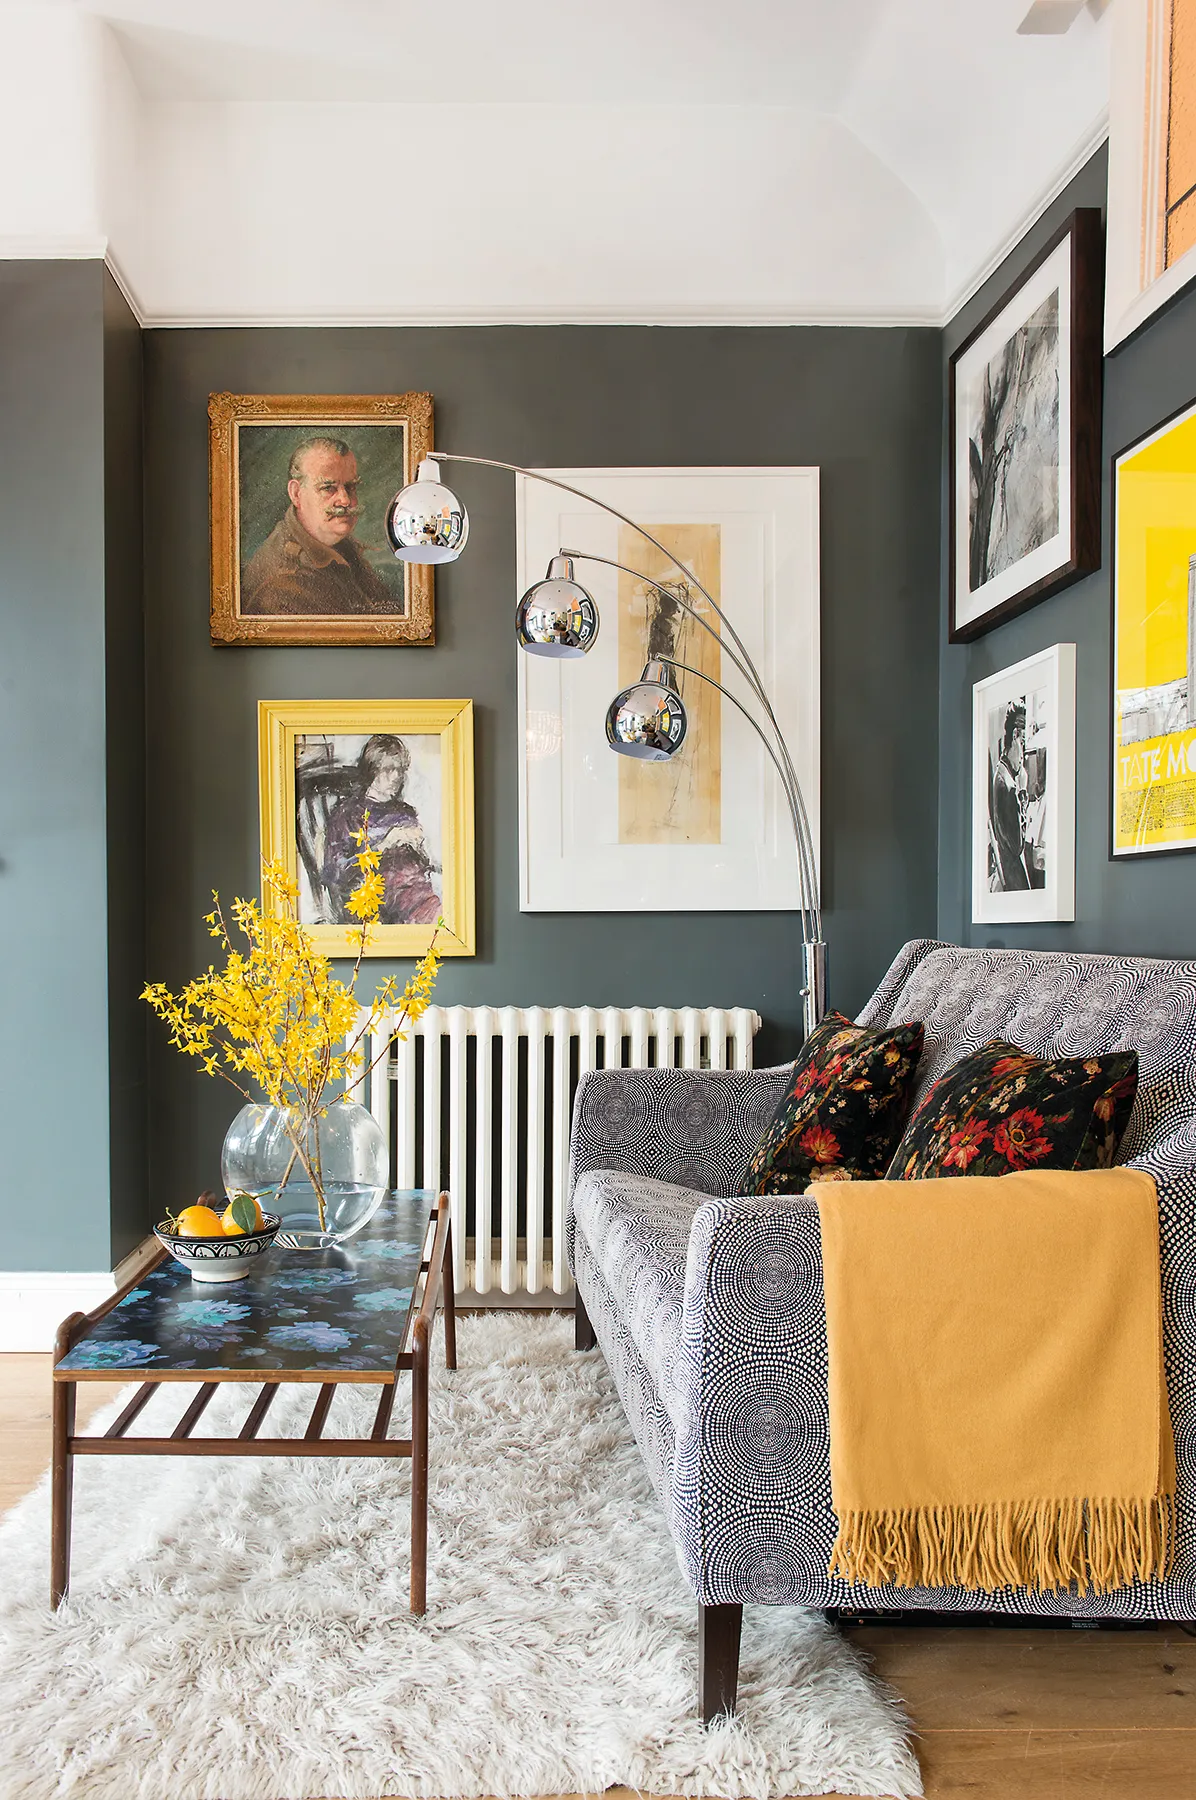 Colourful accessories brighten up the snug’s comfy grey sofa, which came from Sofa Workshop. The striking retro floor lamp – an original American design – was a great-value find at the local Southgate Auction Rooms